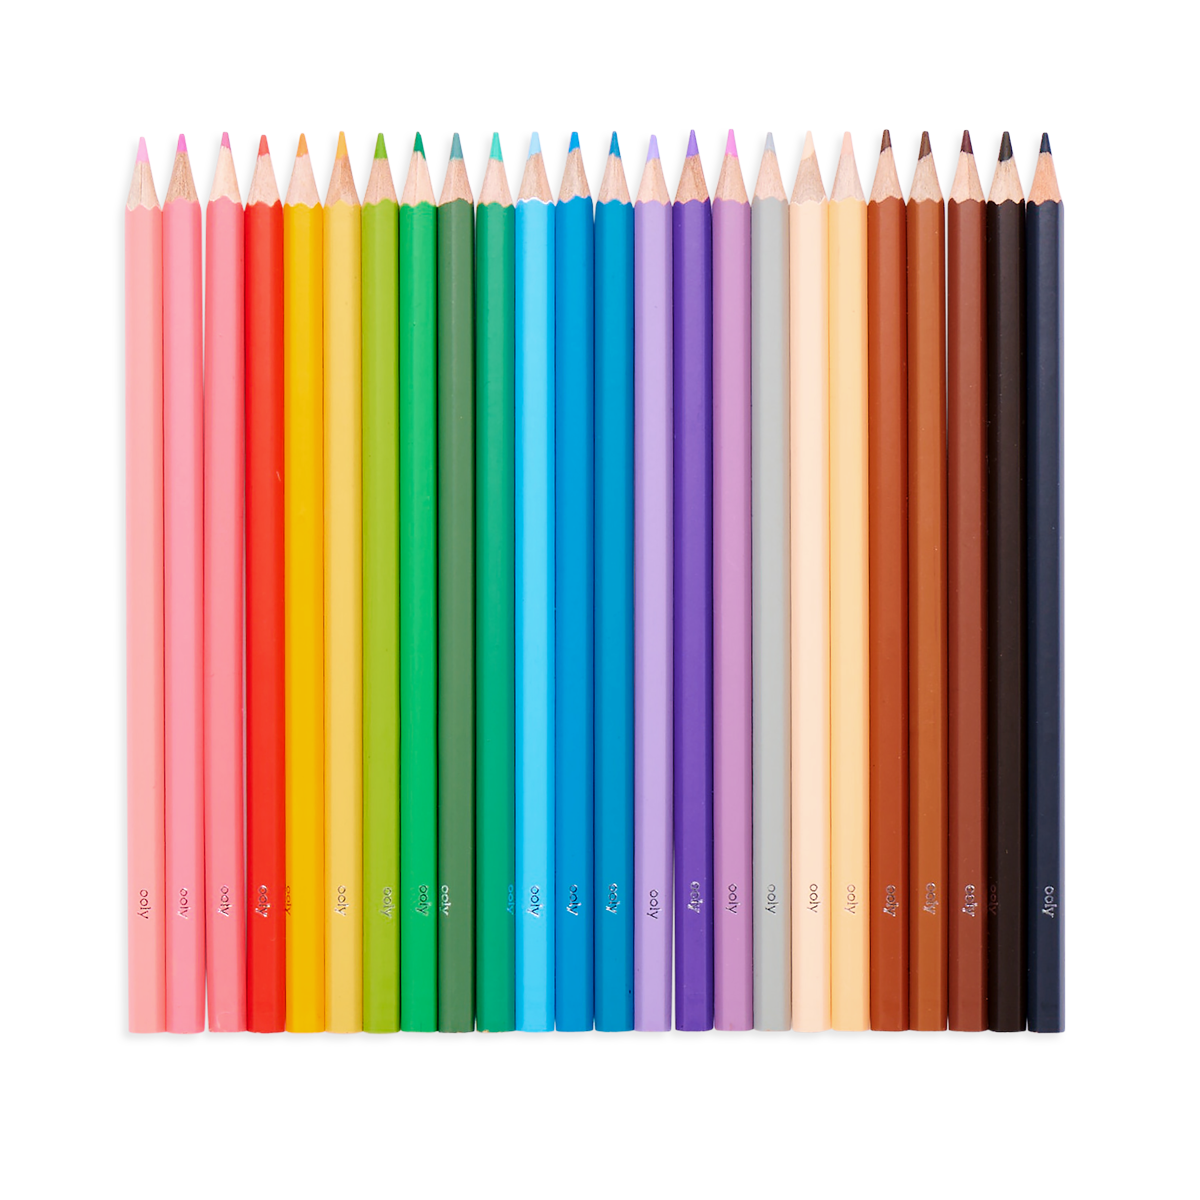 OOLY Color Together Colored Pencils - Set of 24 Colored Pencils